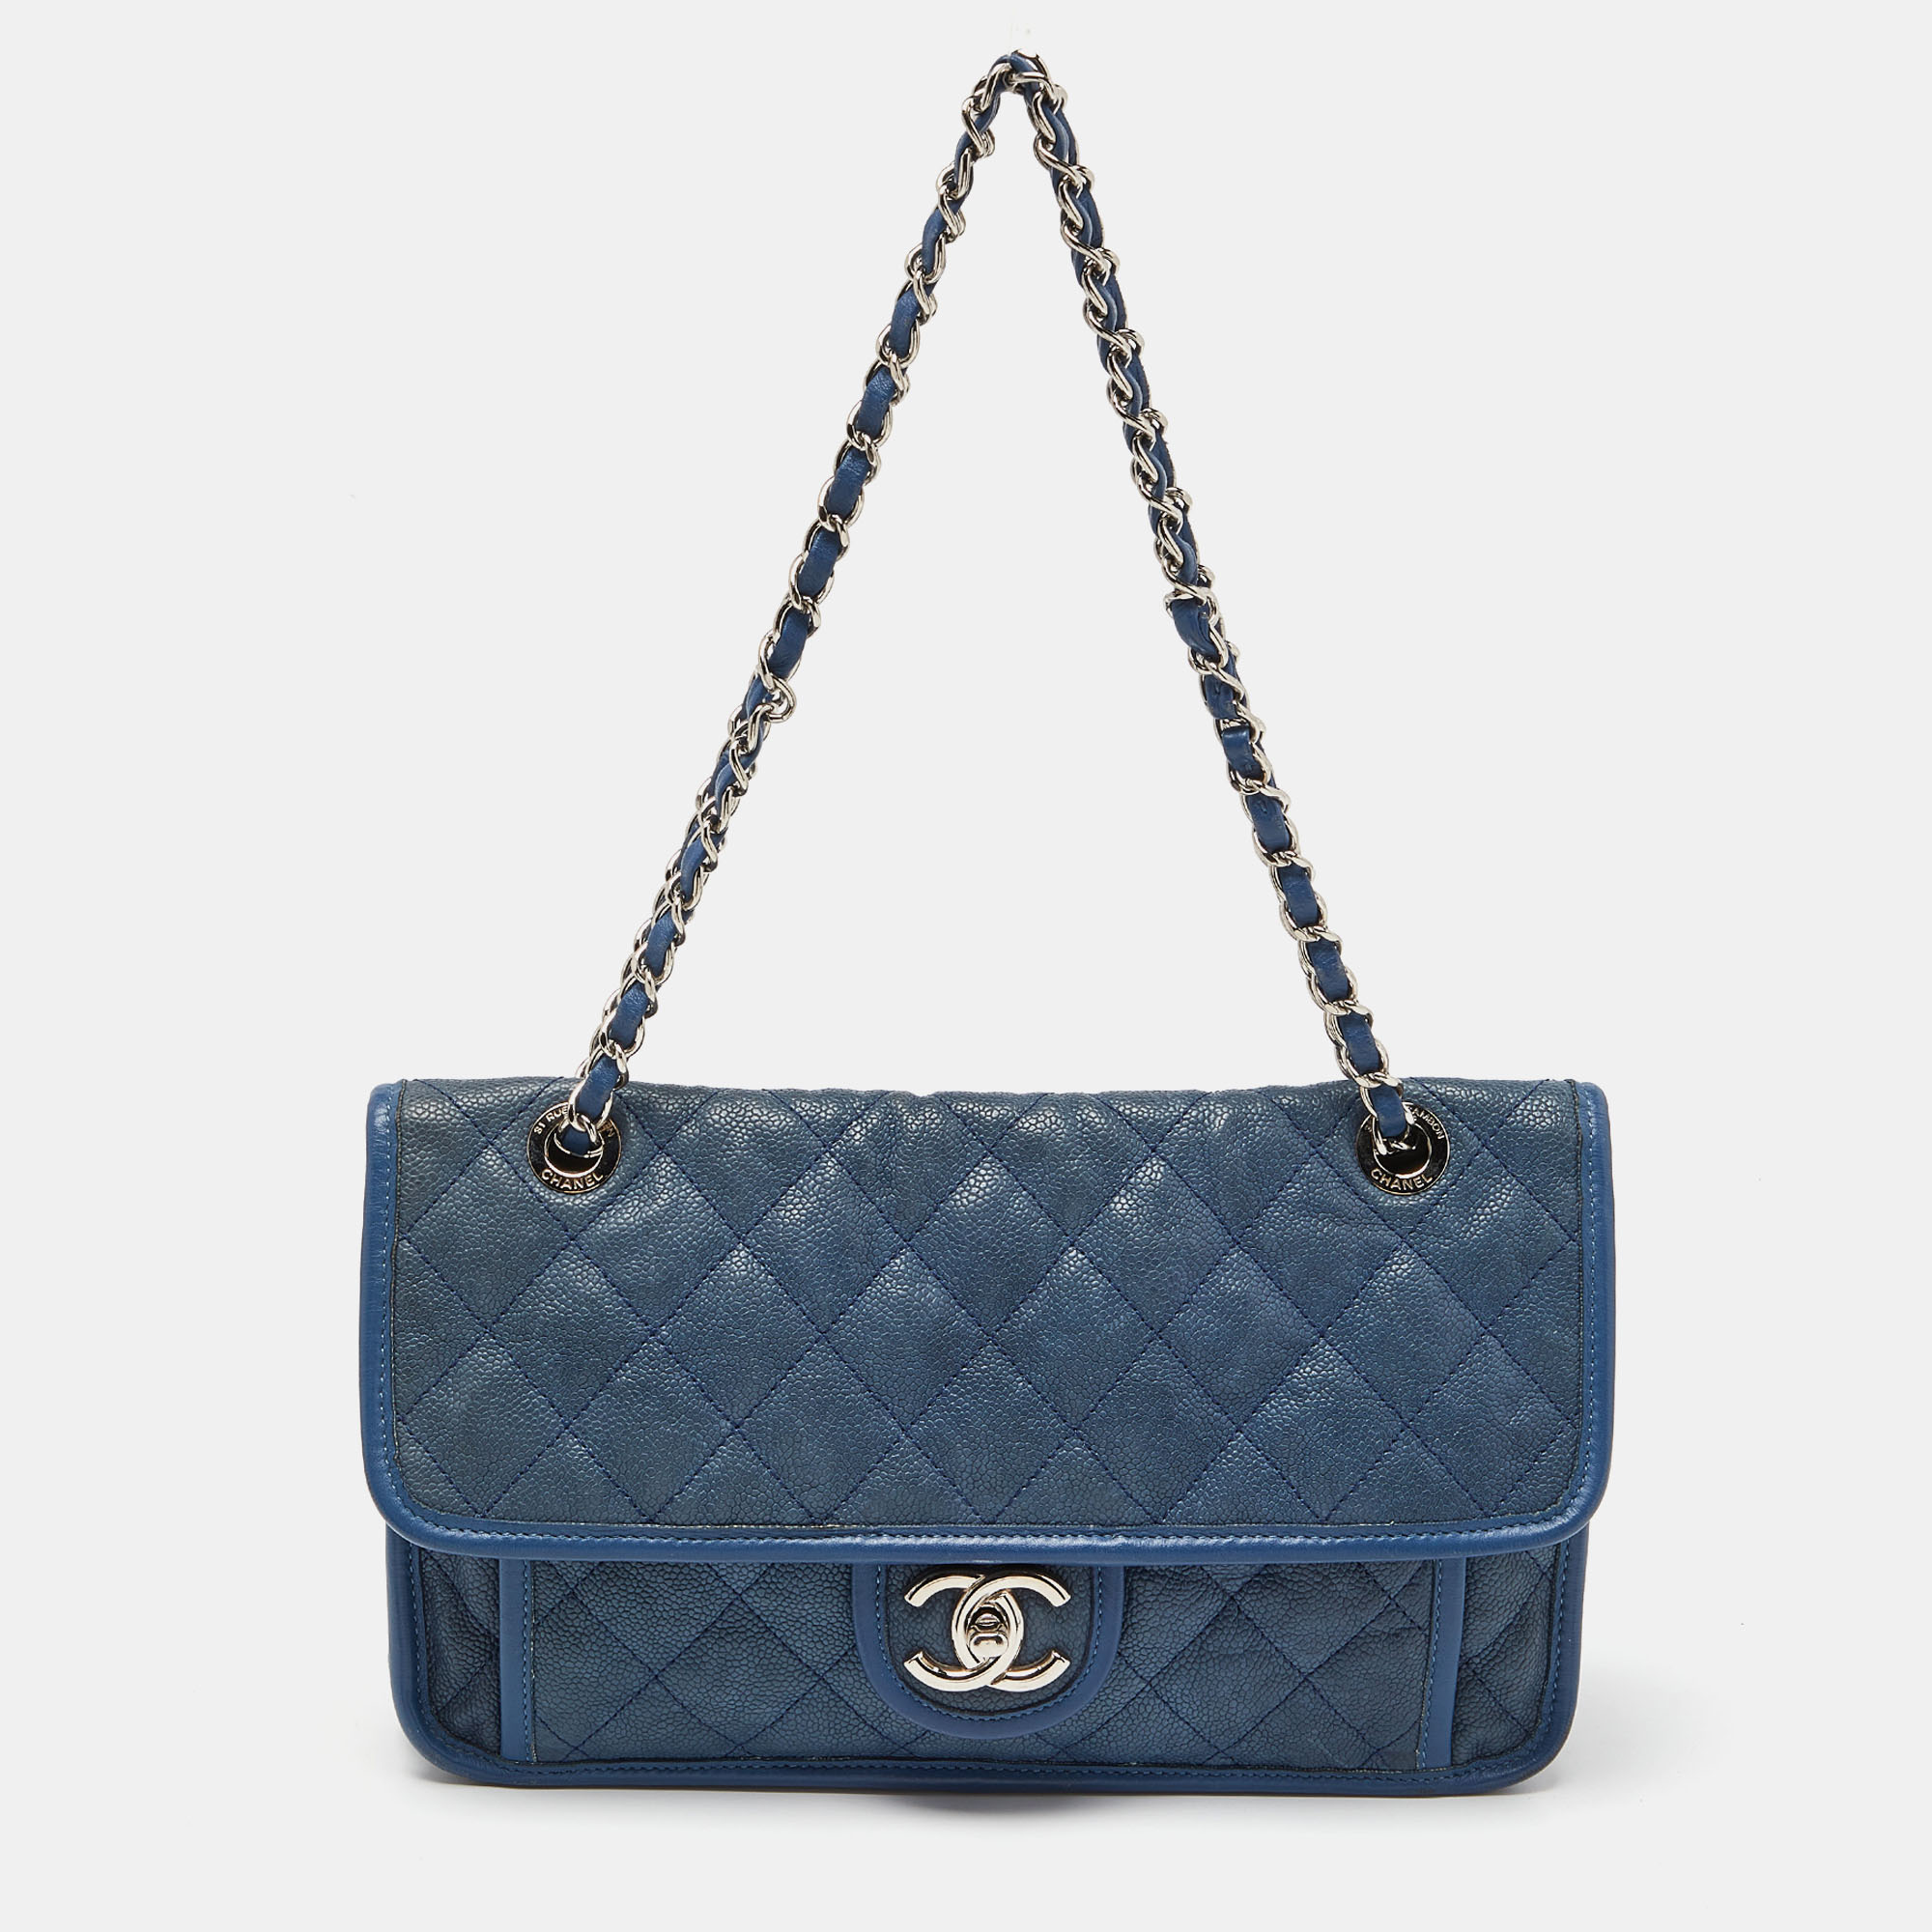 Pre-owned Chanel Blue Quilted Caviar Leather Cc French Riviera Flap Bag